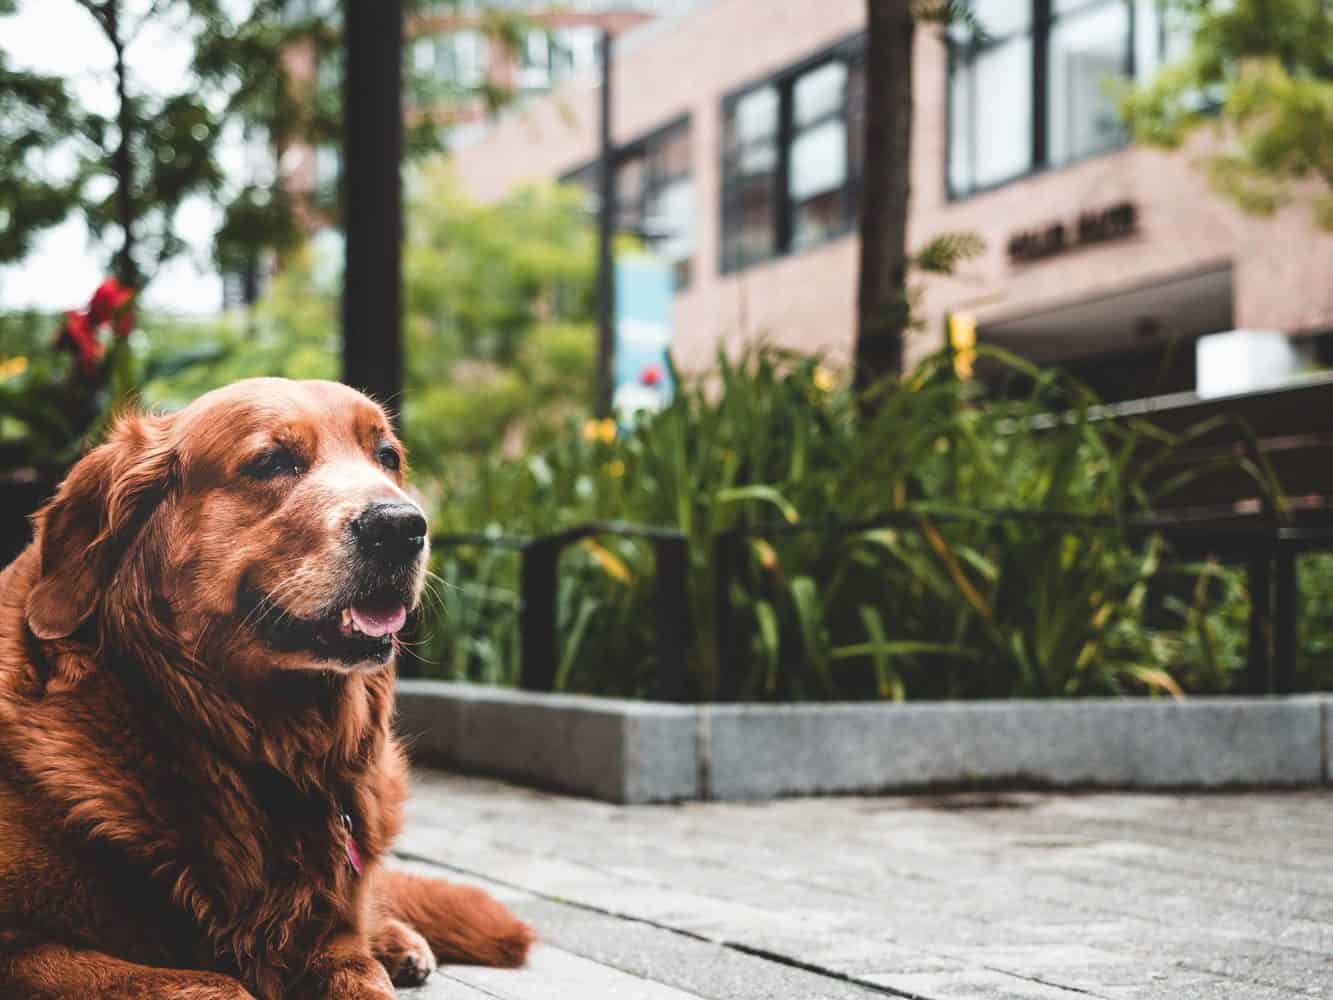 Can dogs get dementia?